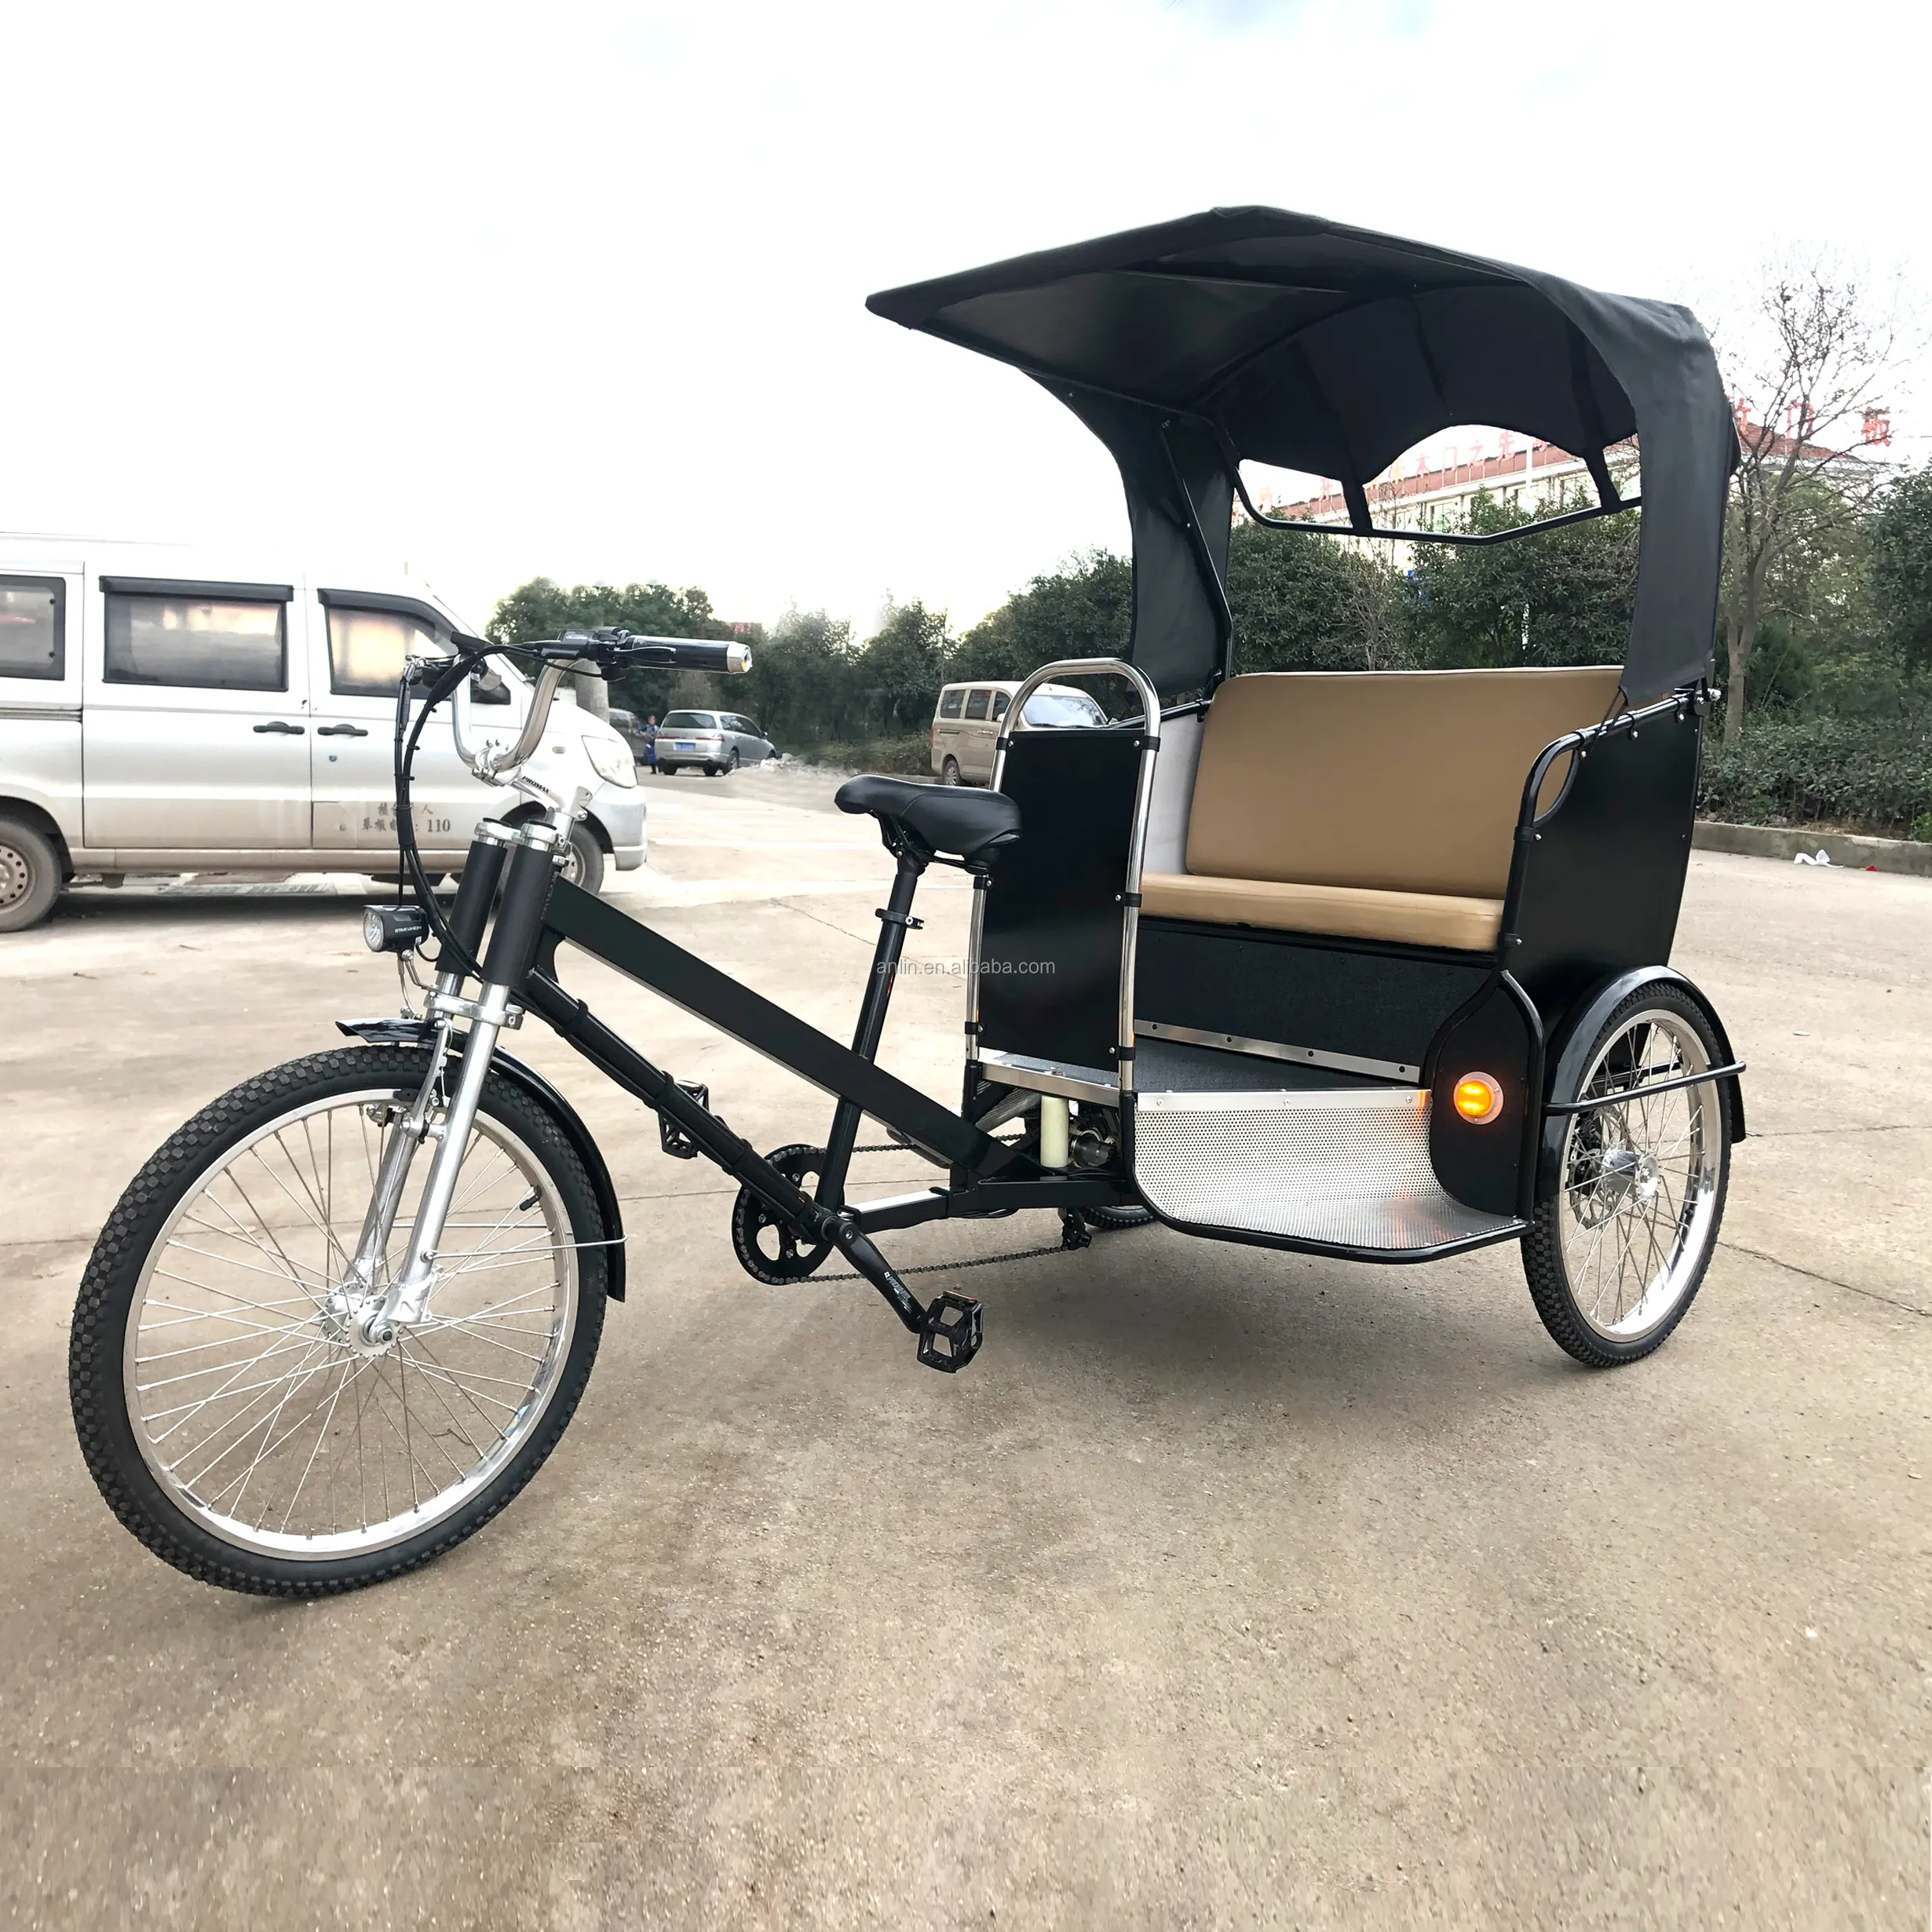 ESTER 3 Wheel Pedicab Taxi Passenger, luxury electric tricycle adults, upgrade parts every year